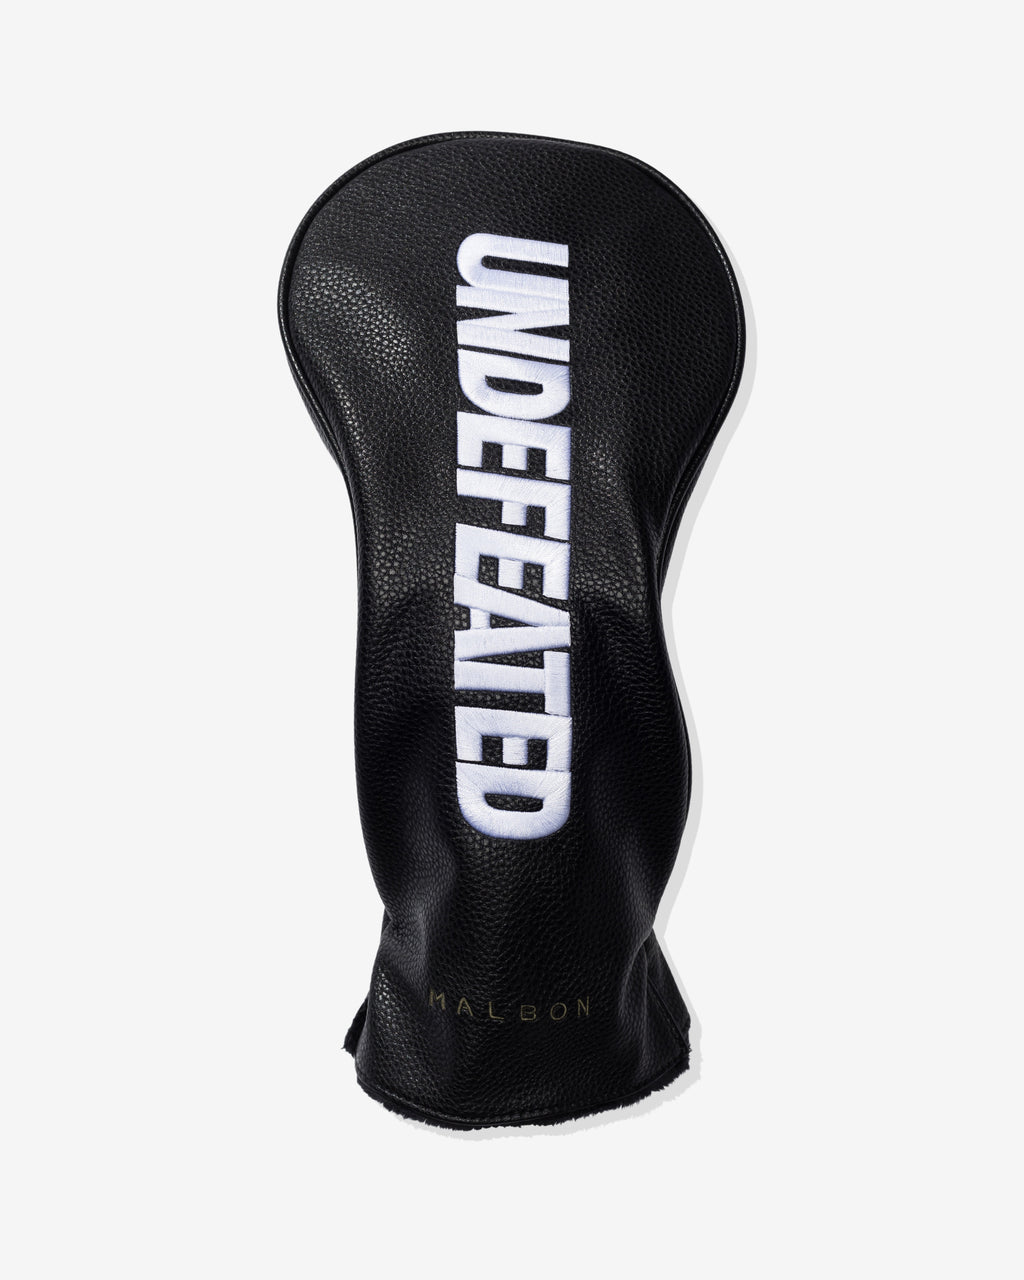 UNDEFEATED X MALBON DRIVER HEADCOVER